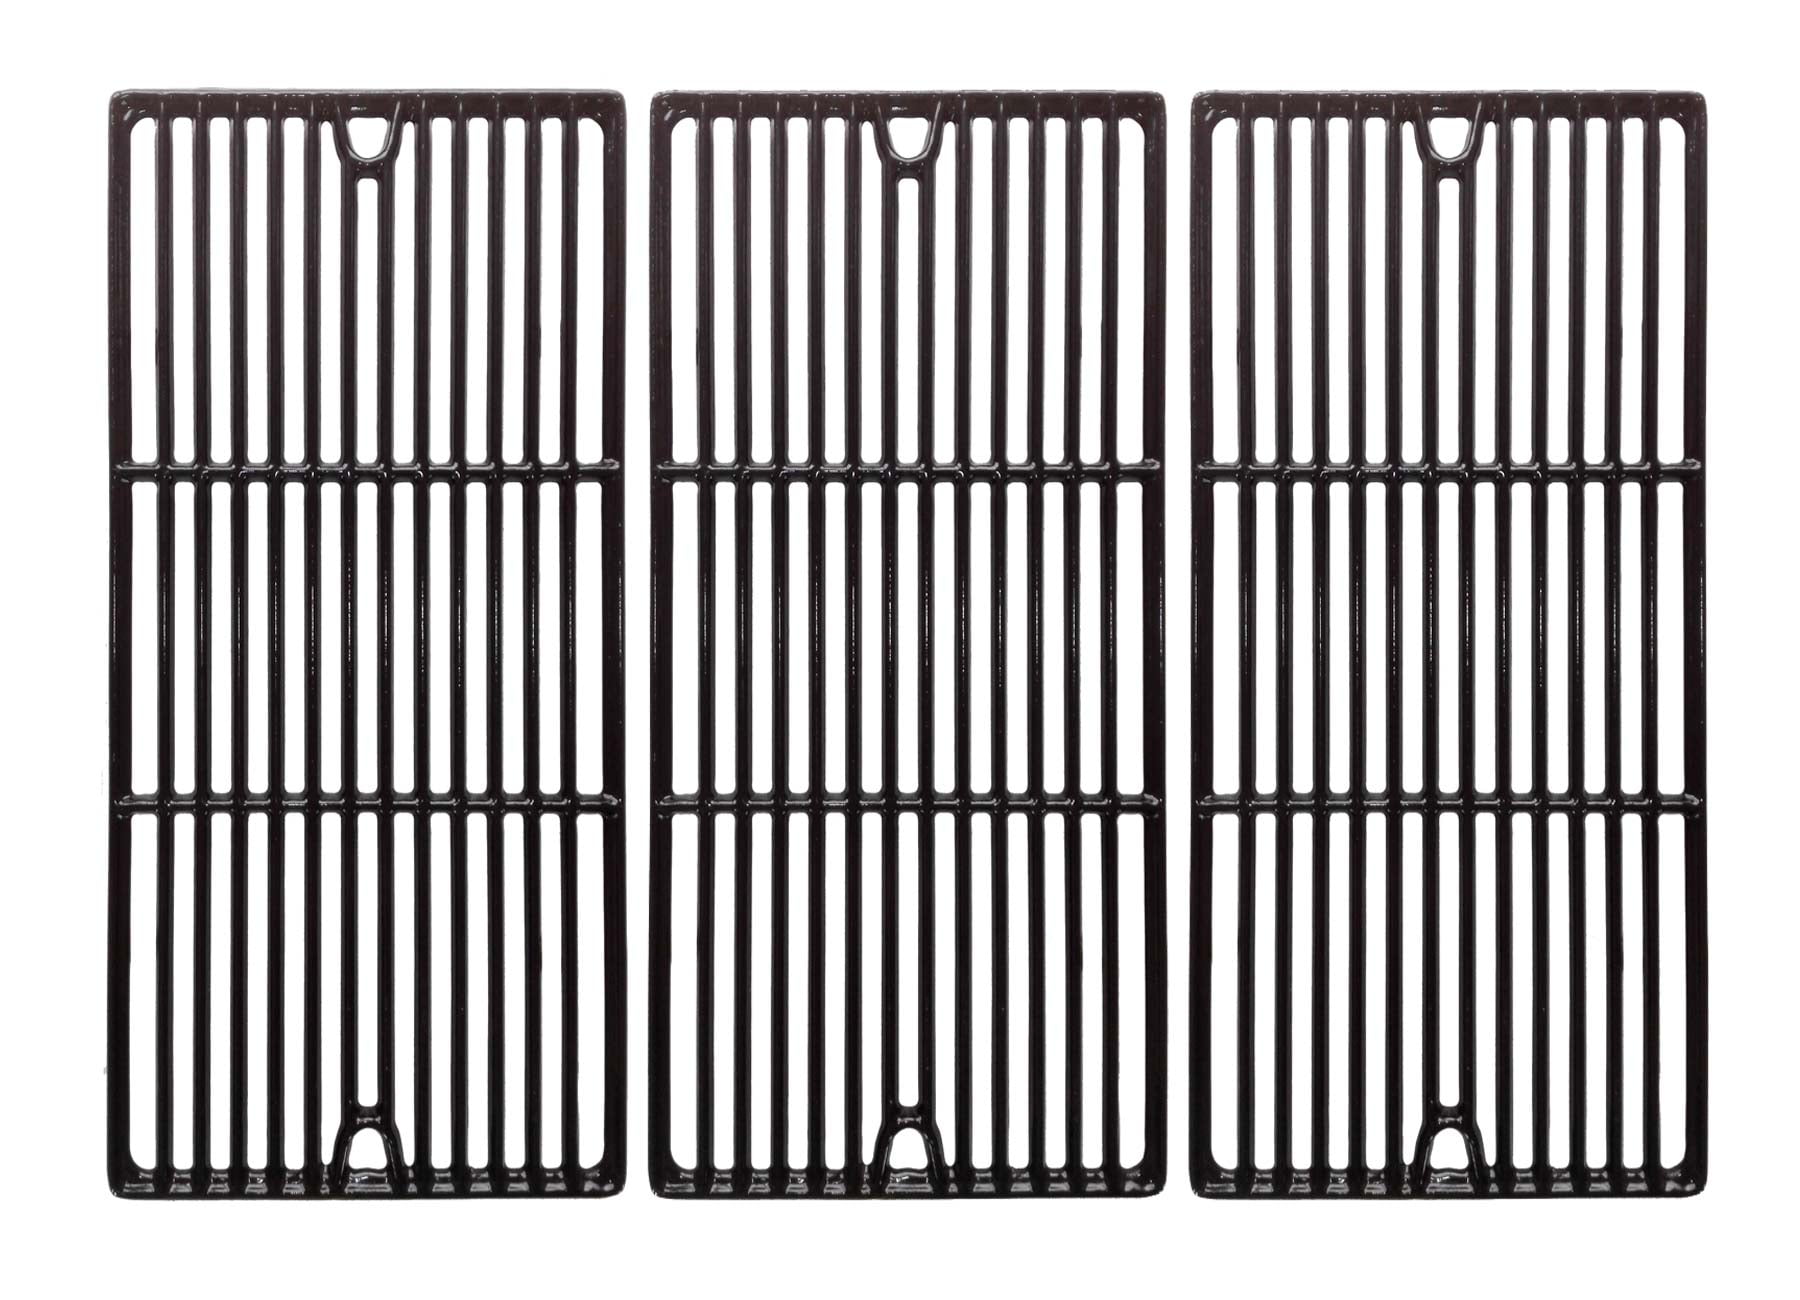 G61802 G61801 85-3060-6 85-3061-4 Gourmet Pro 900 Cast-Iron Cooking Grid 